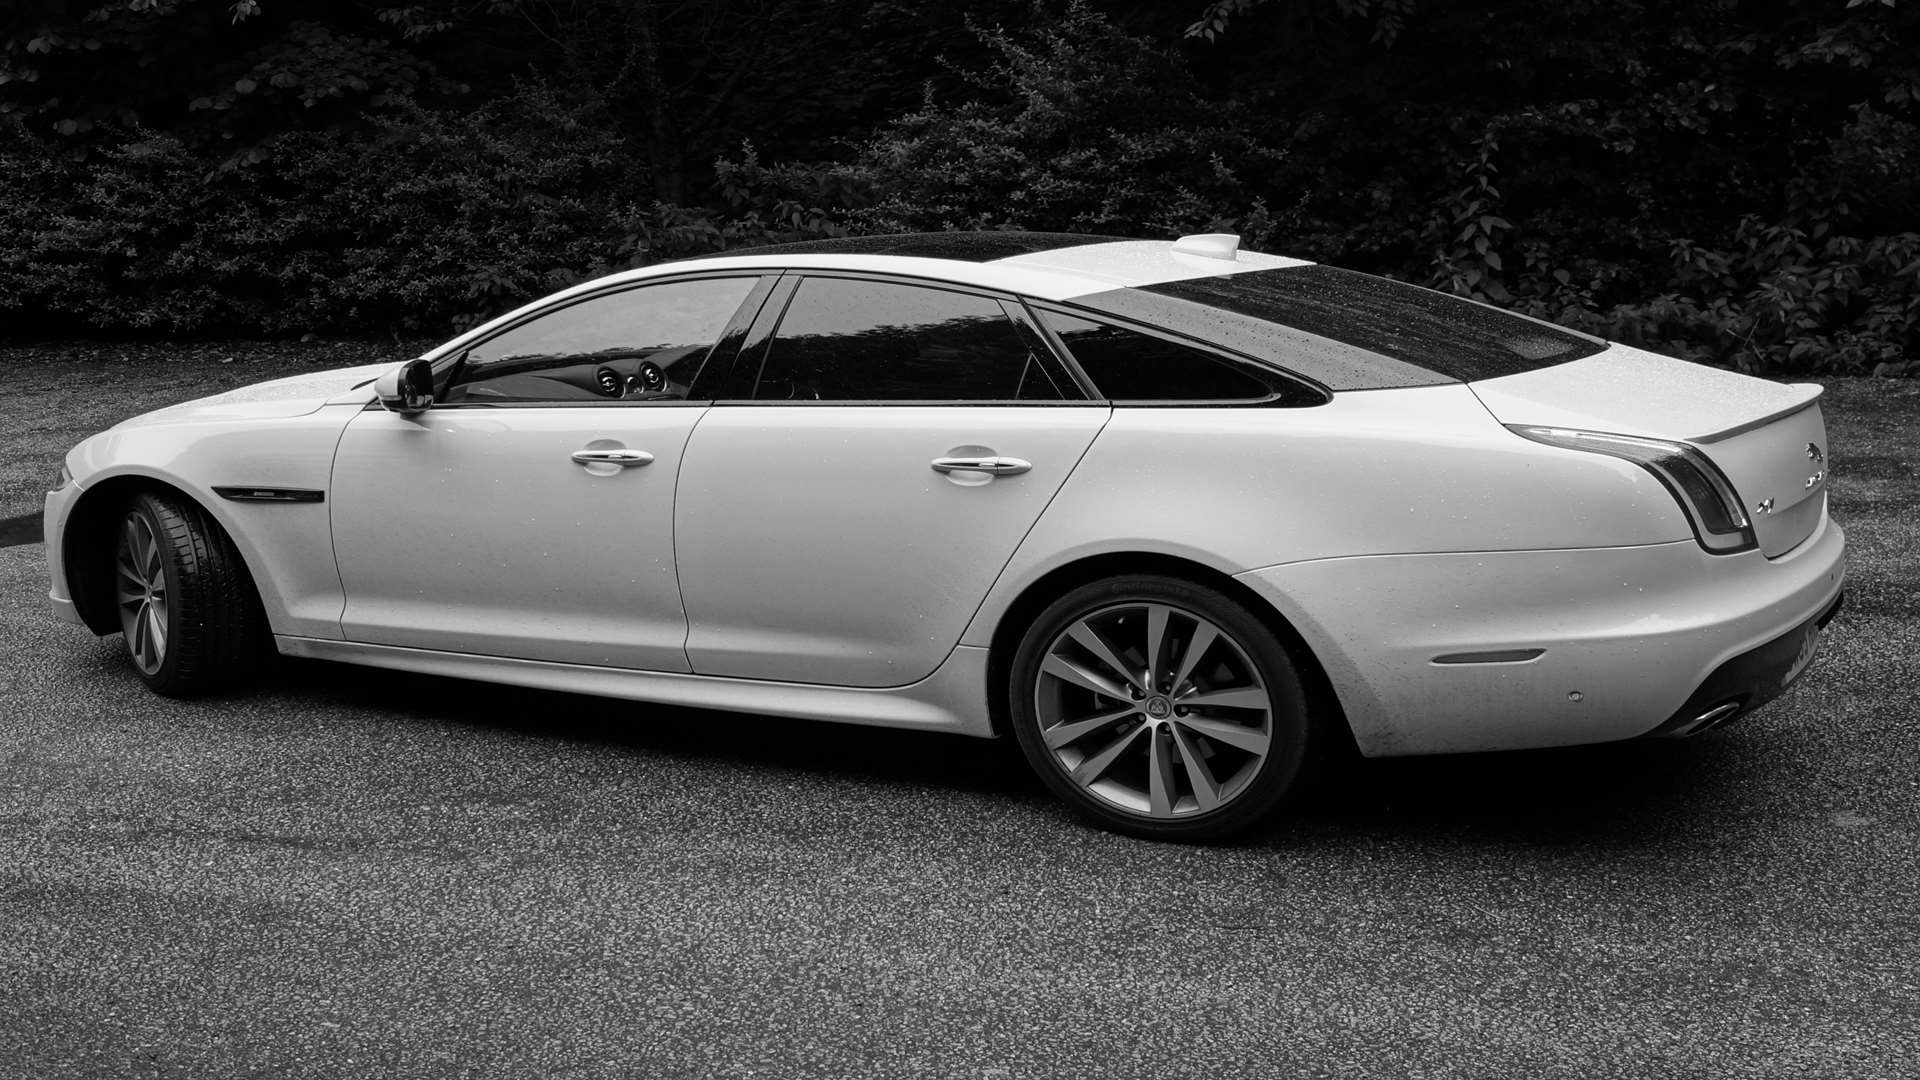 The XJ is six years old but remains one of the best-looking cars on the road